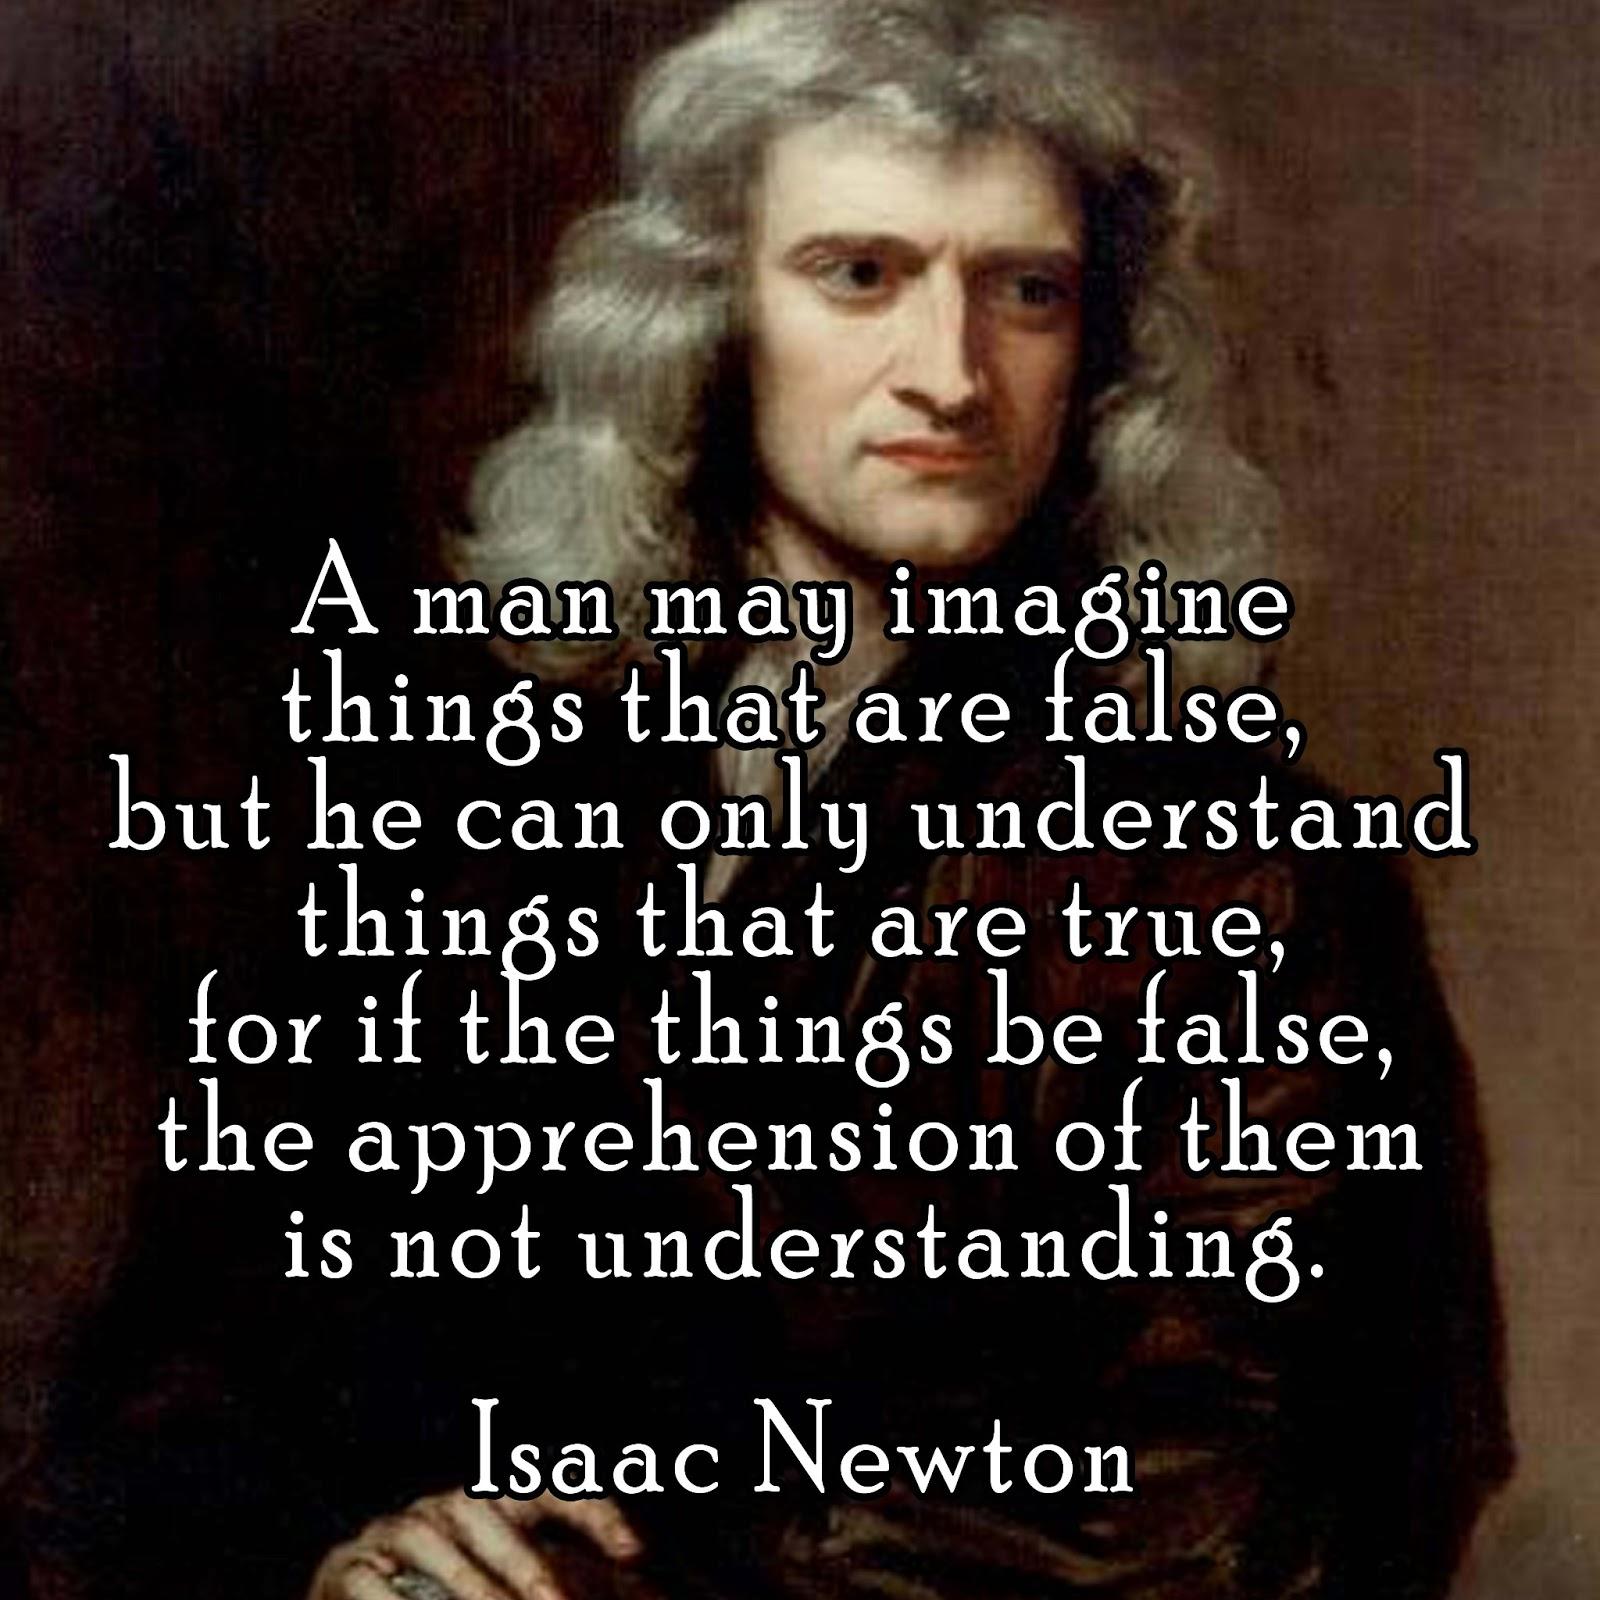 Love Quotes By Newton: Best ideas about isaac newton on